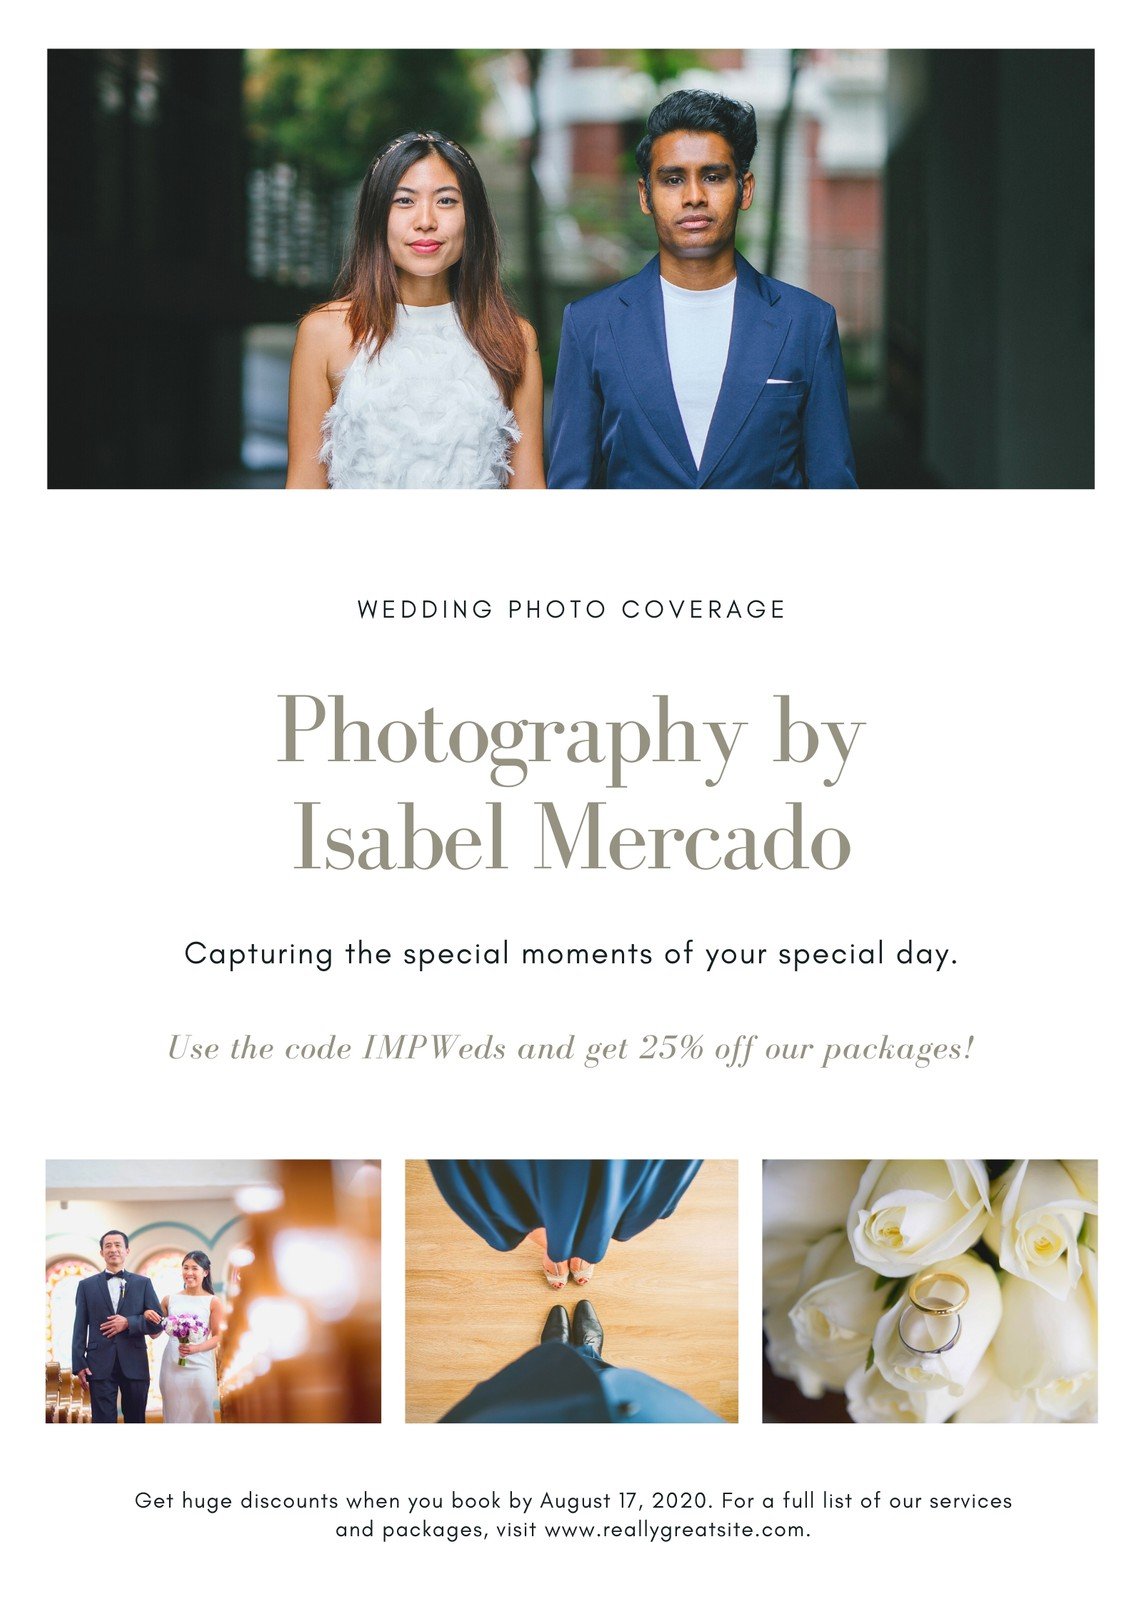 The New-Age Wedding Photography and Videography Trends